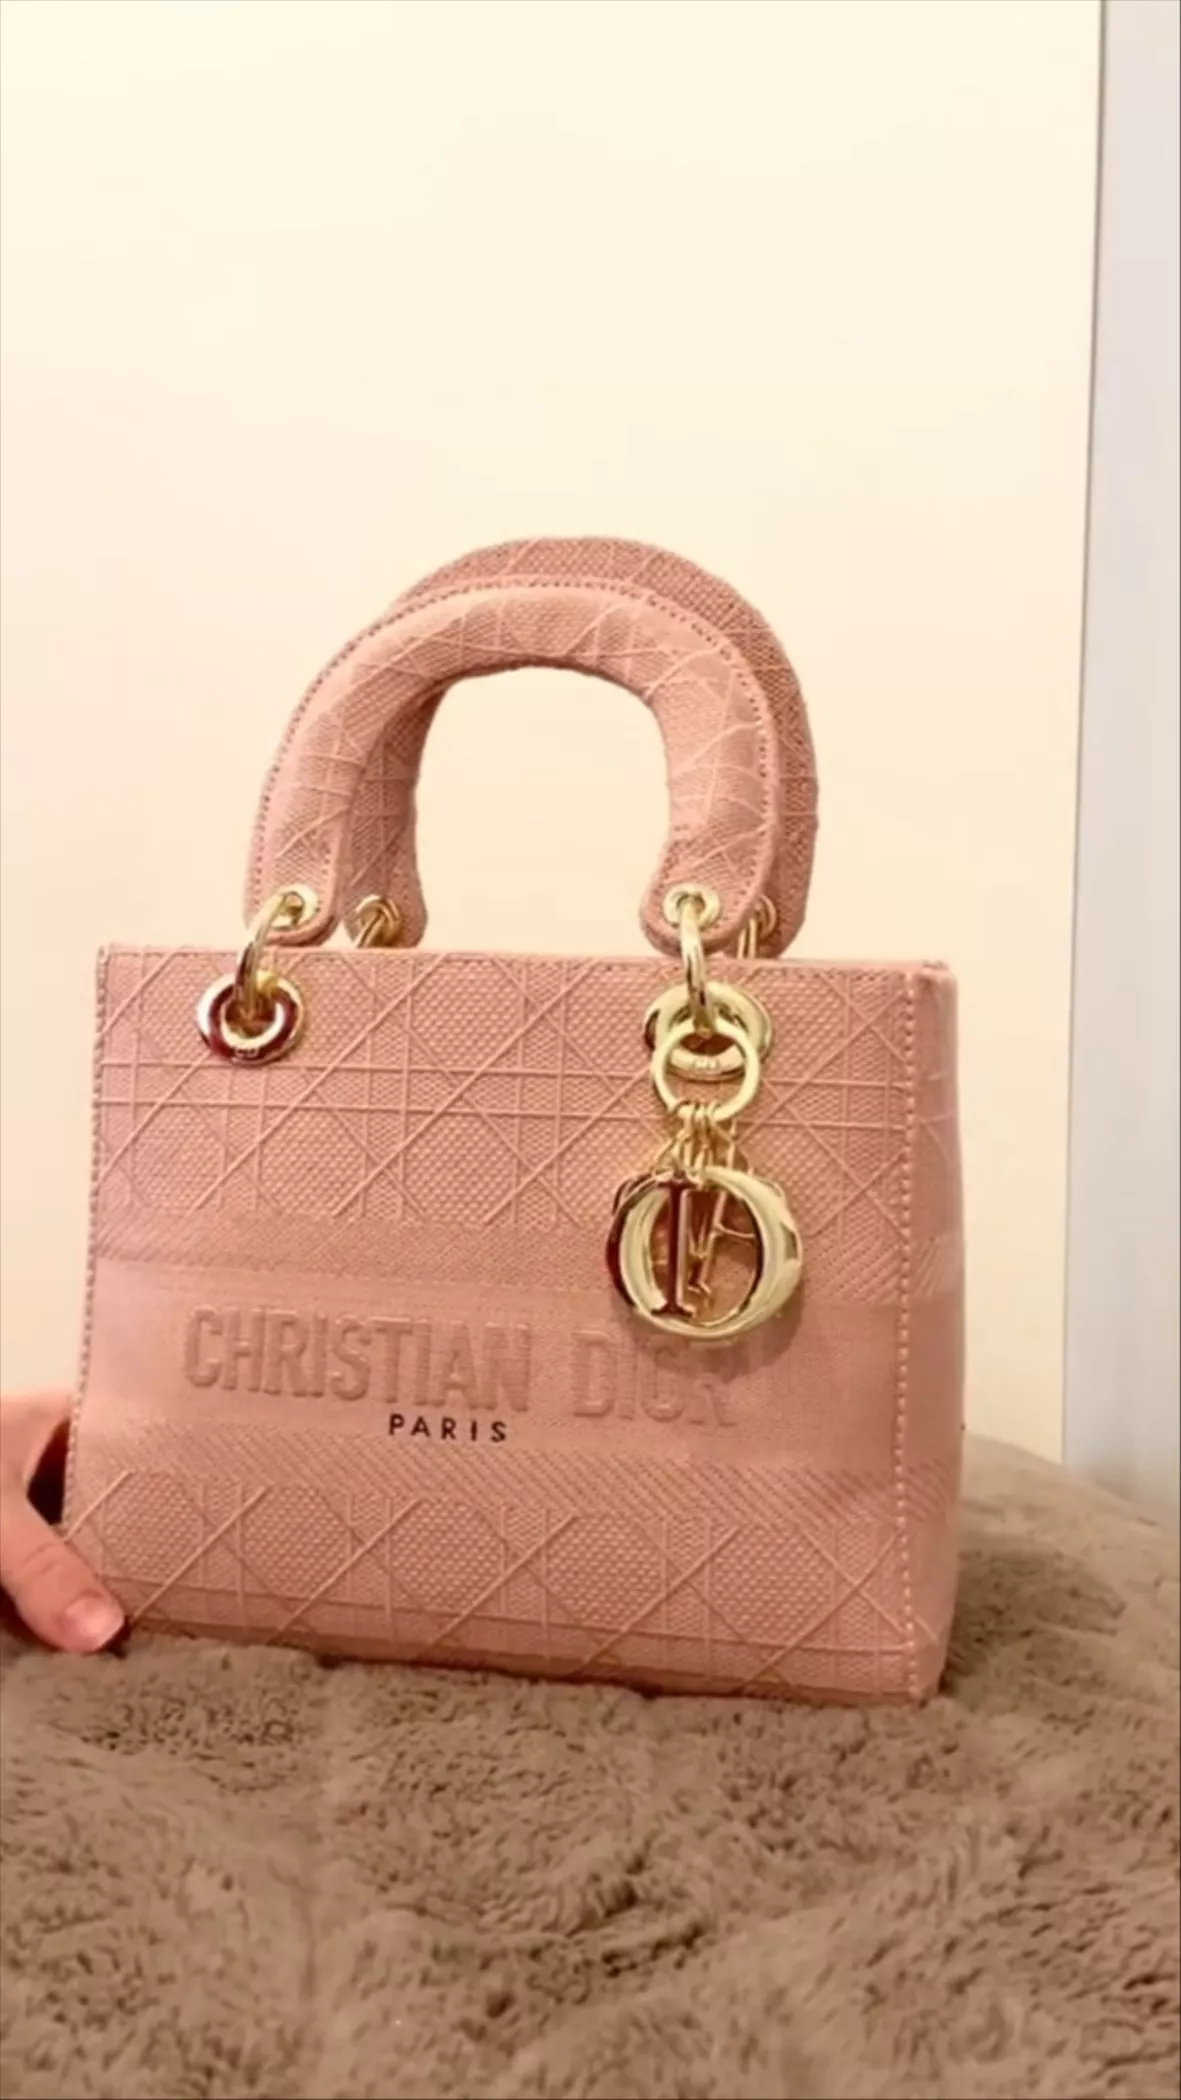 dior roller bag from dhgate｜TikTok Search